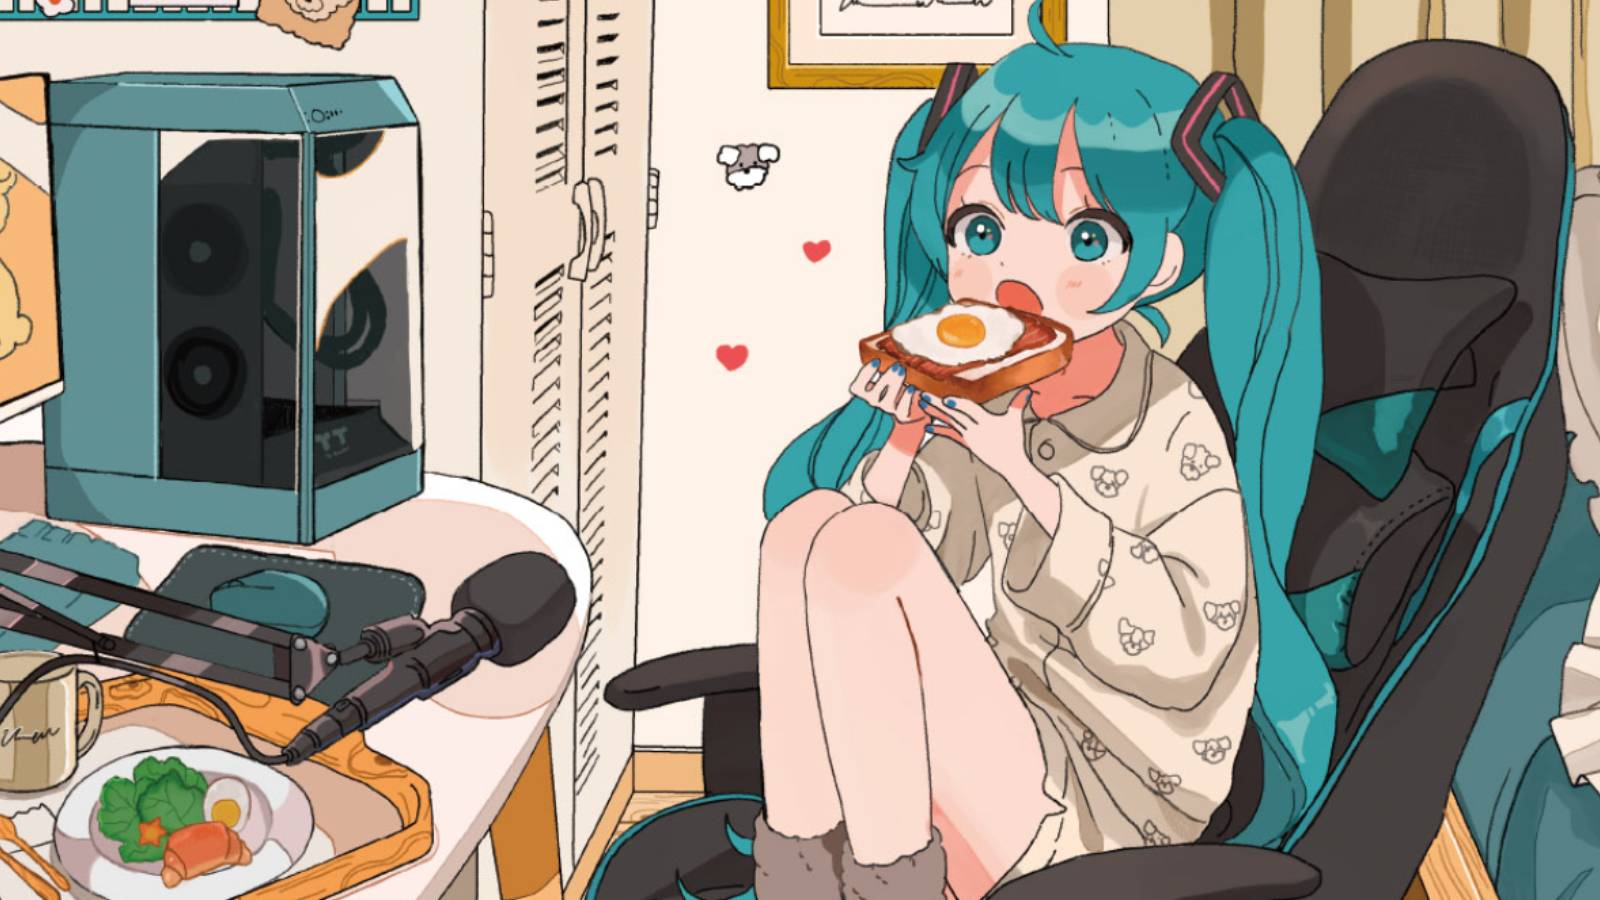 Official art by artist maple, from the Thermaltake and Hatsune Miku PC accessories release.